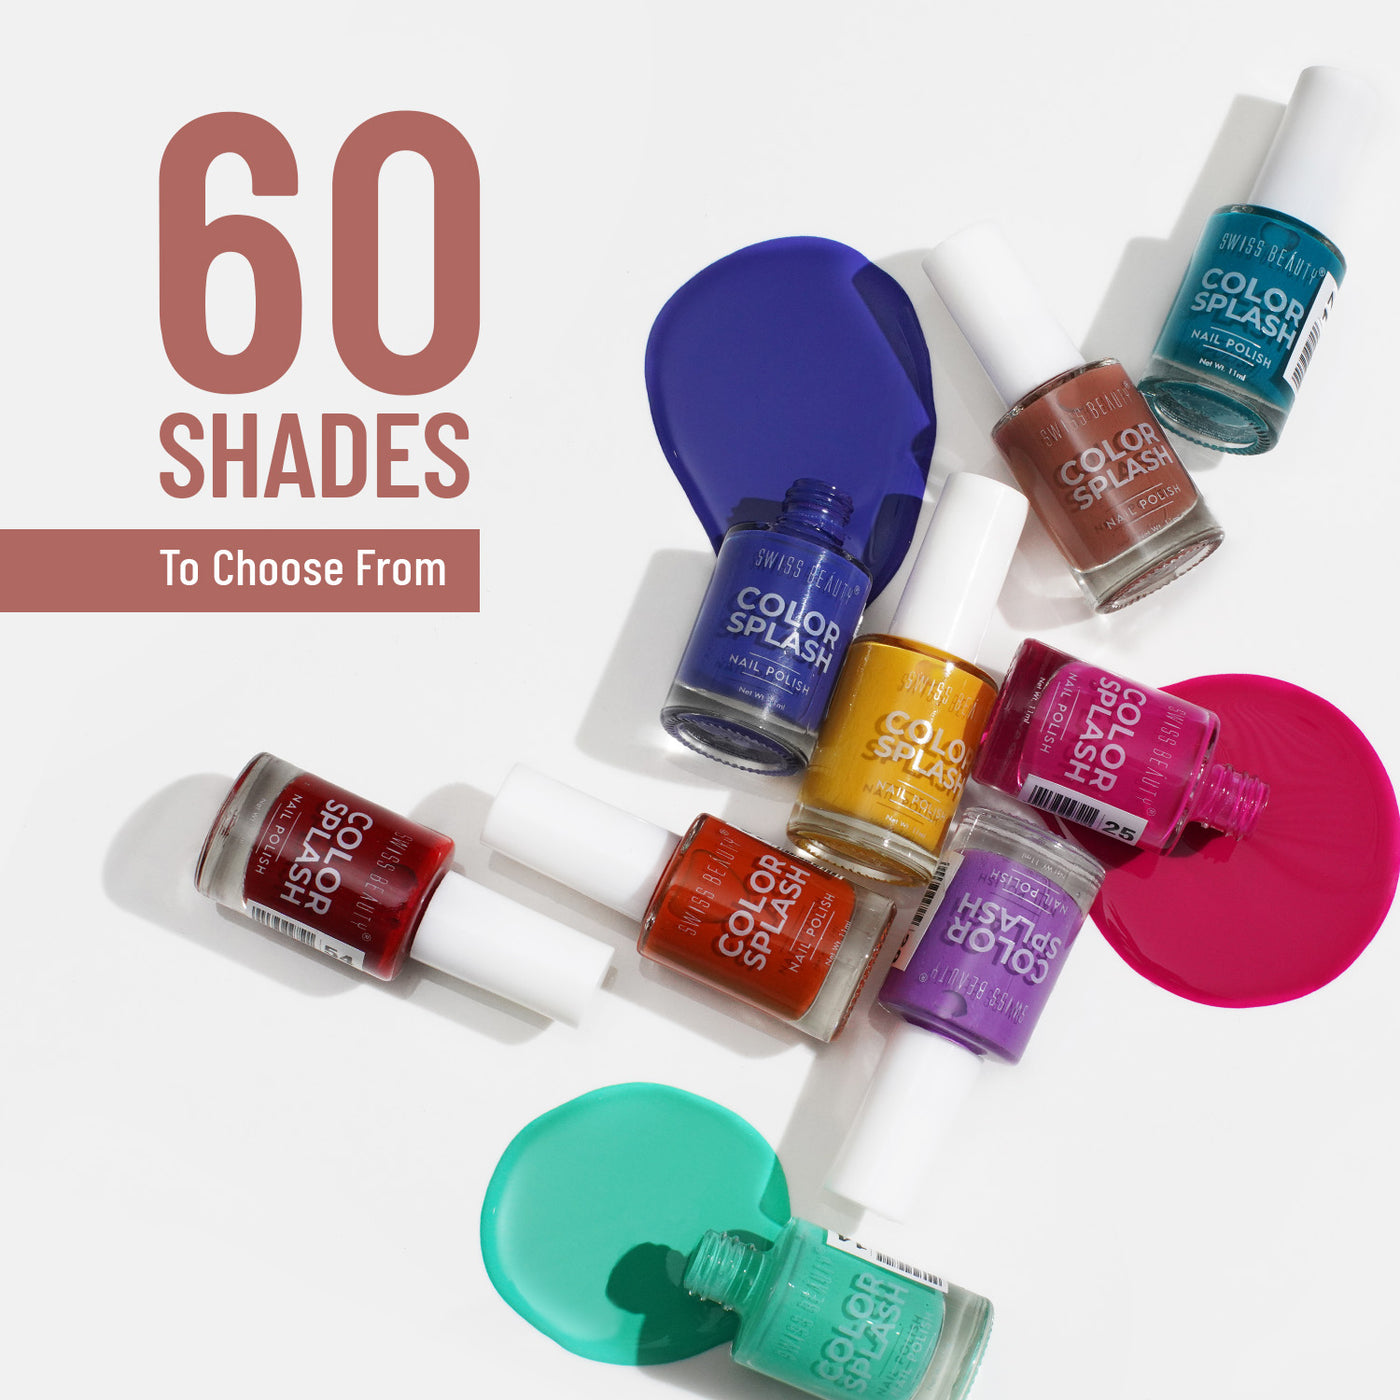 SWISS BEAUTY POP UP NAIL POLISH 10ml Shade-03 - Price in India, Buy SWISS  BEAUTY POP UP NAIL POLISH 10ml Shade-03 Online In India, Reviews, Ratings &  Features | Flipkart.com